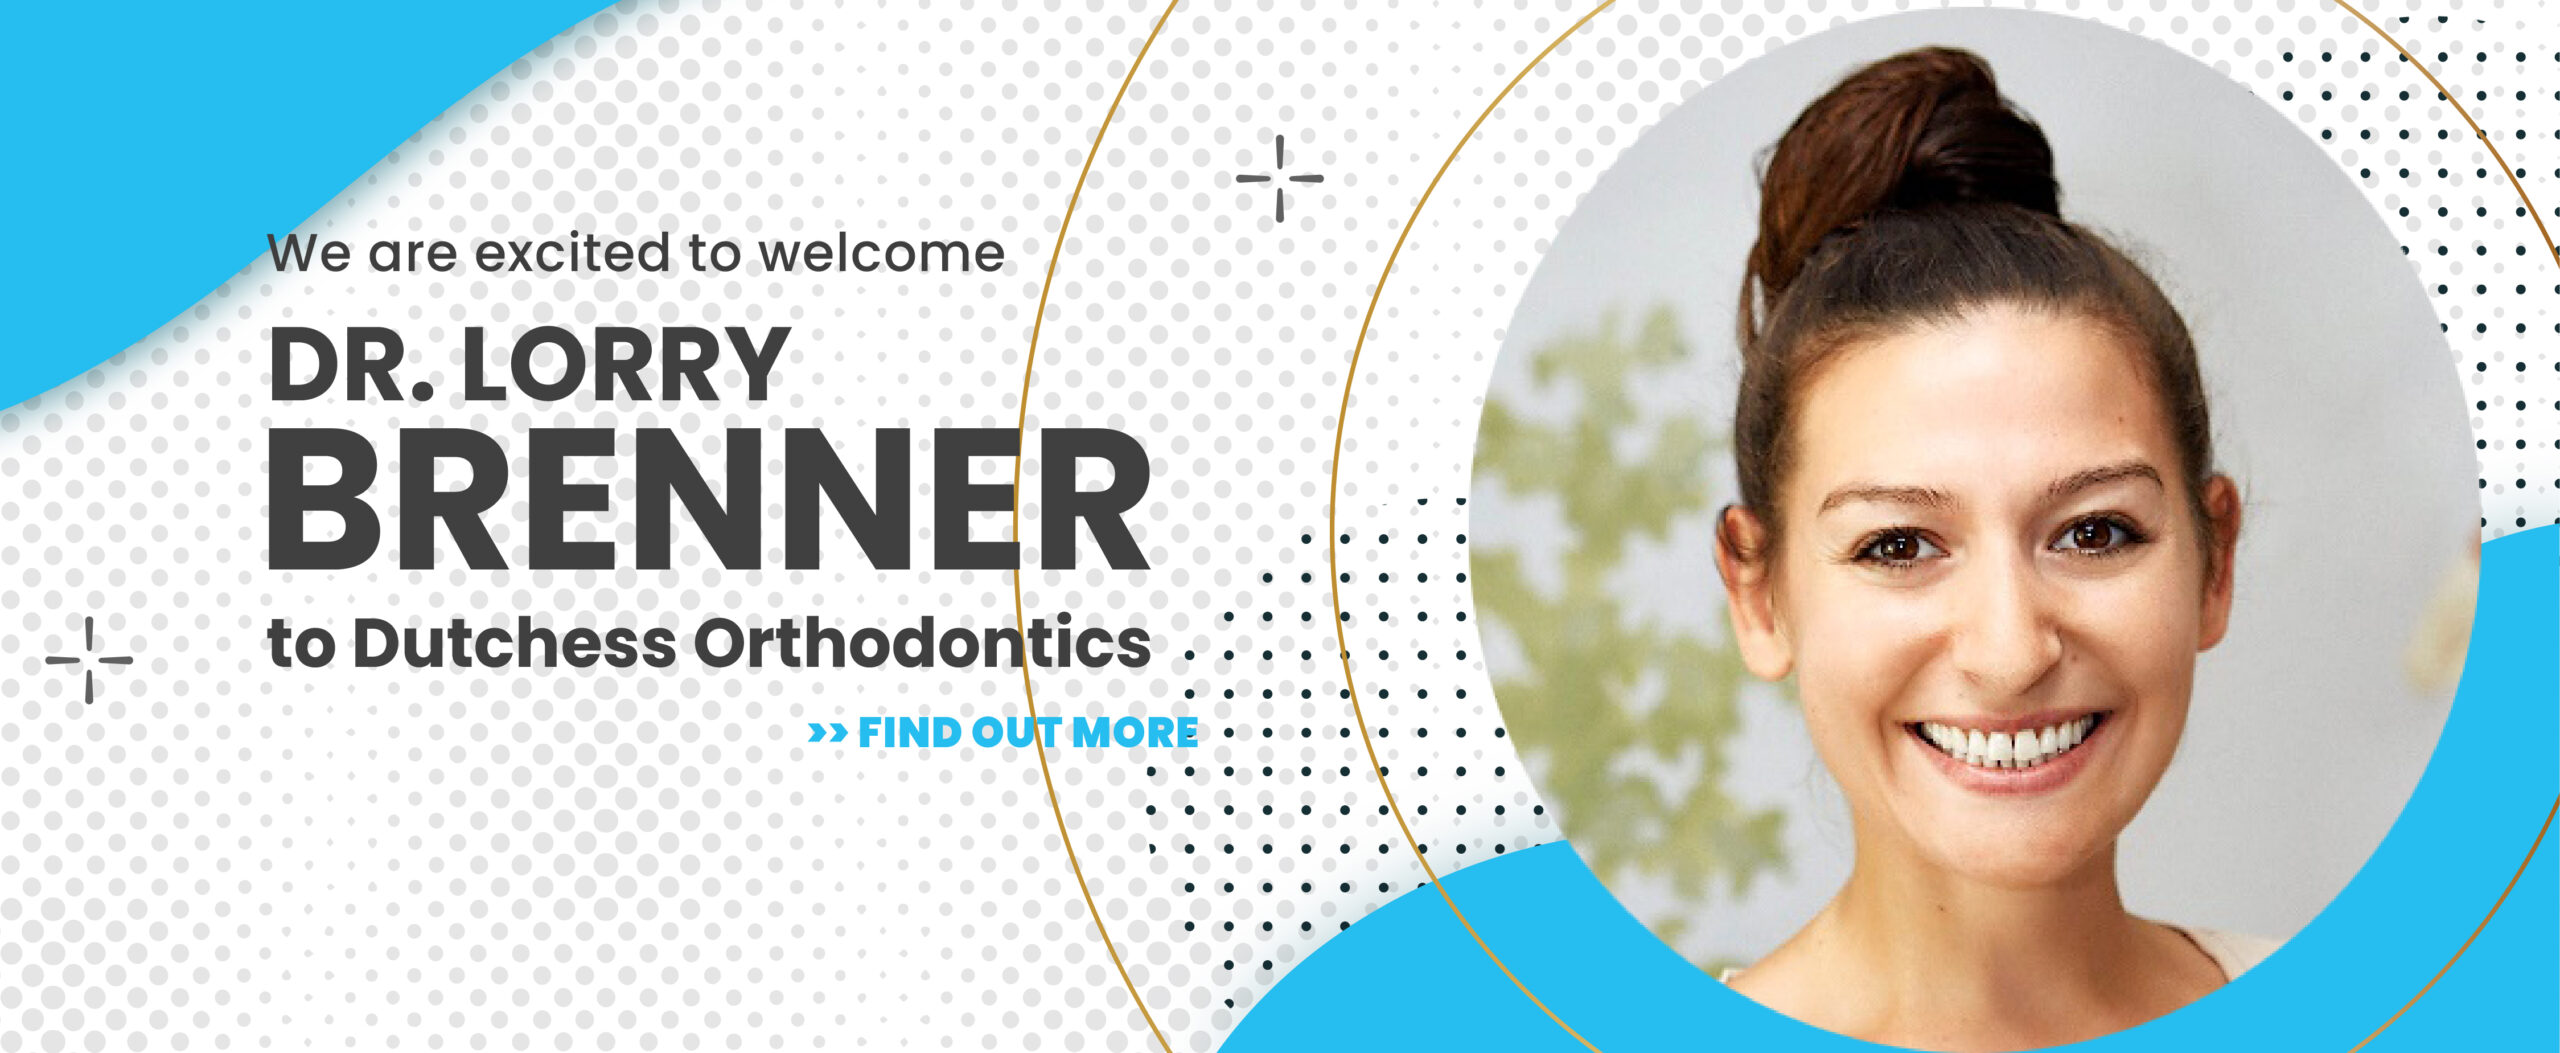 We are excited to welcome Dr. Lorraine Brenner to Dutchess Orthodontics.